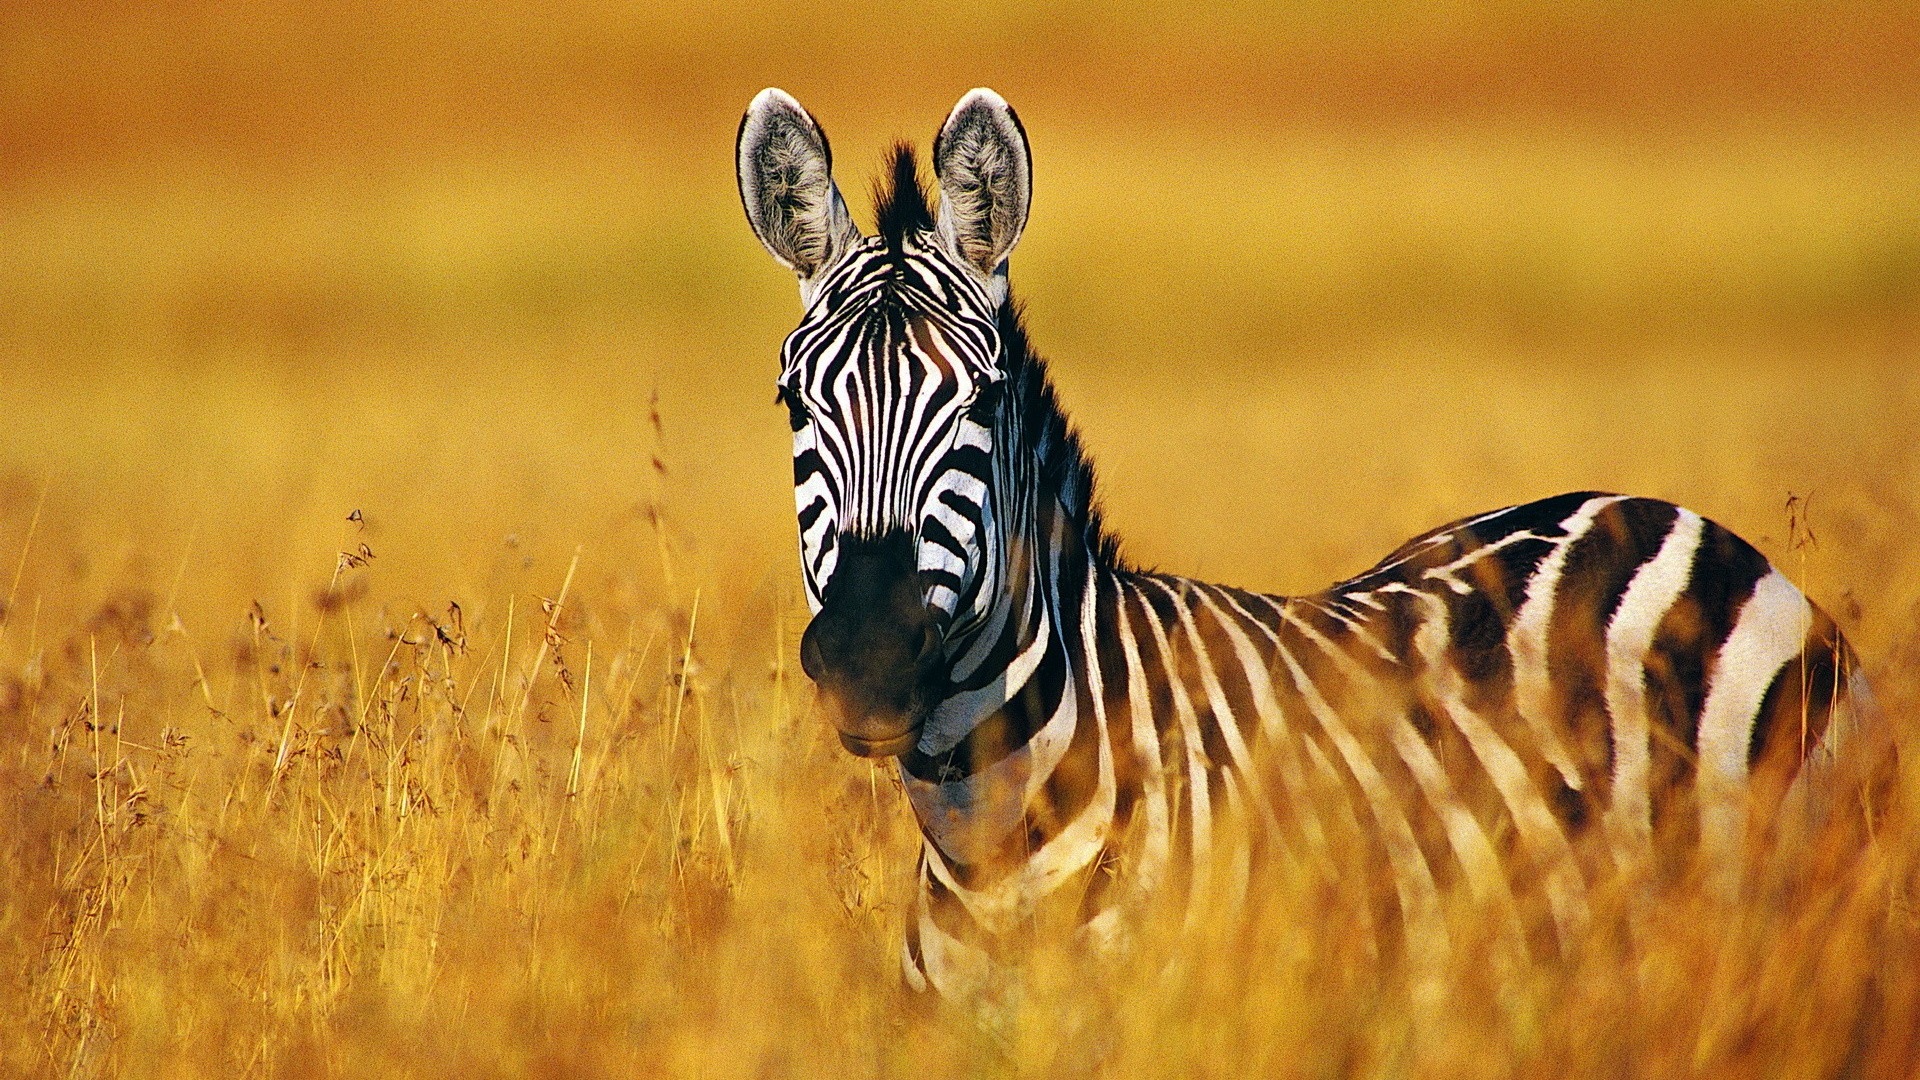 Black and white striped animal, zebra HD wallpapers #4 - 1920x1080